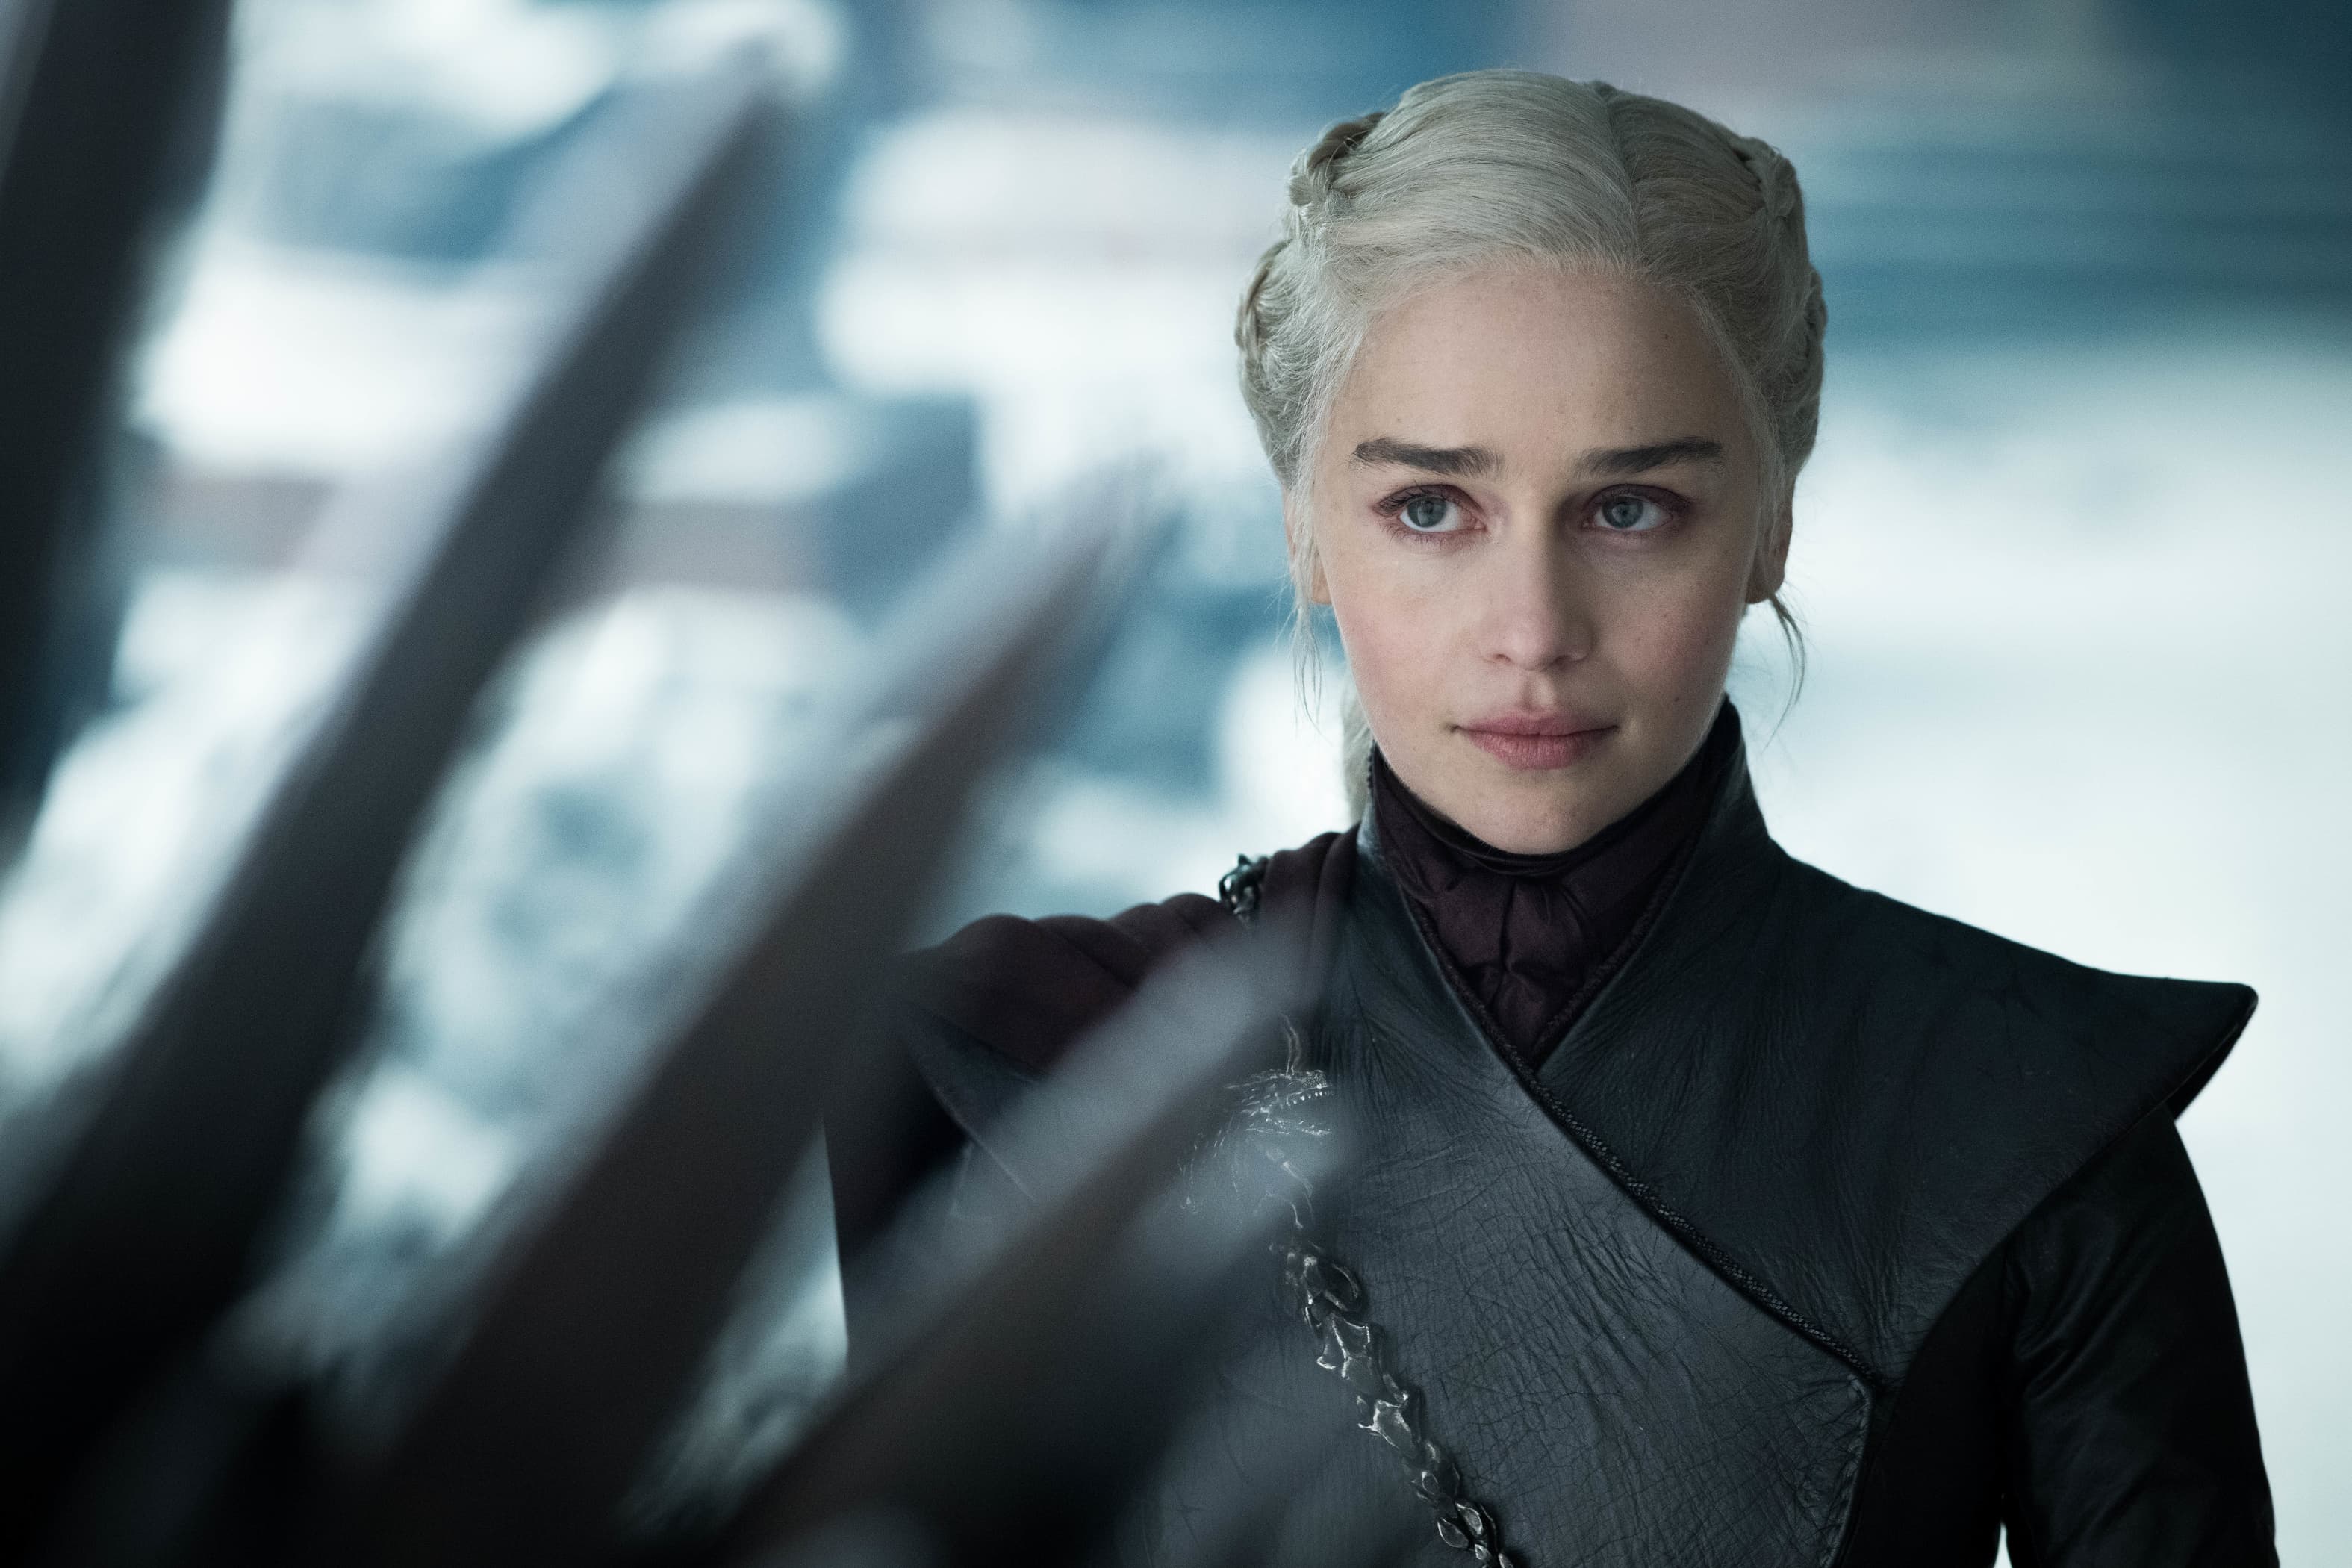 The epic flameout of Daenerys Targaryen left many Game of Thrones fans disappointed.